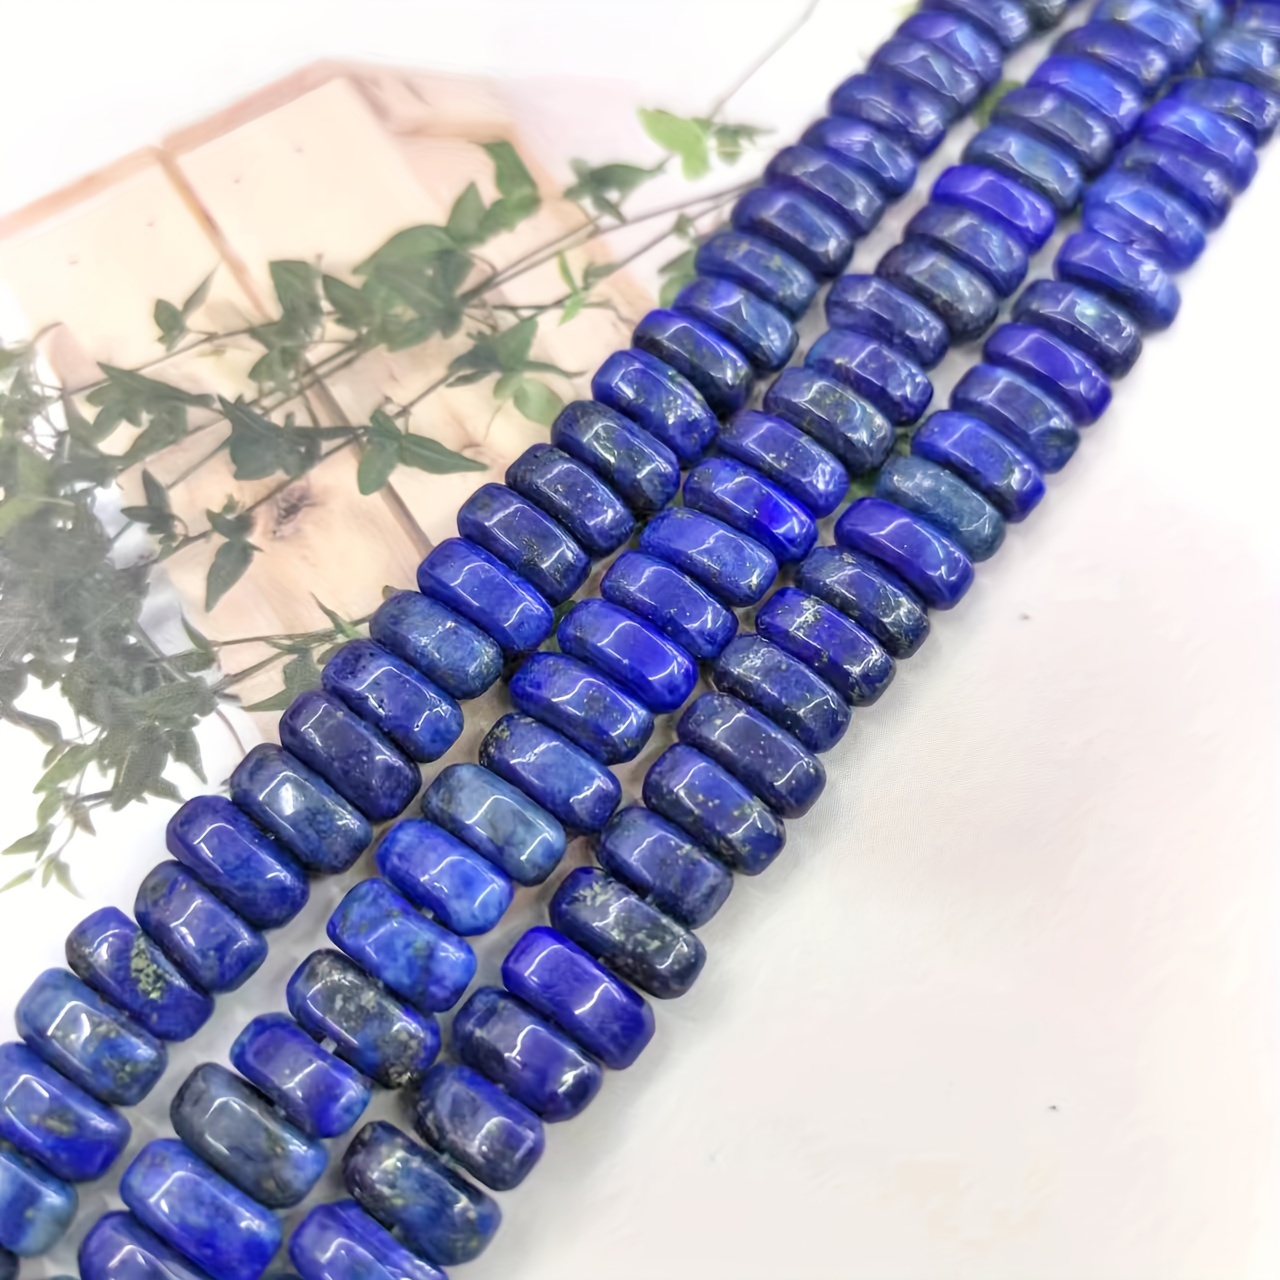 

1 String 43pcs Natural Lapis Lazuli Melon Seed Bohemian Loose Beads For Handmade Diy Special Unique Bracelets Necklaces Sweater Chains Jewelry Making Craft Supplies